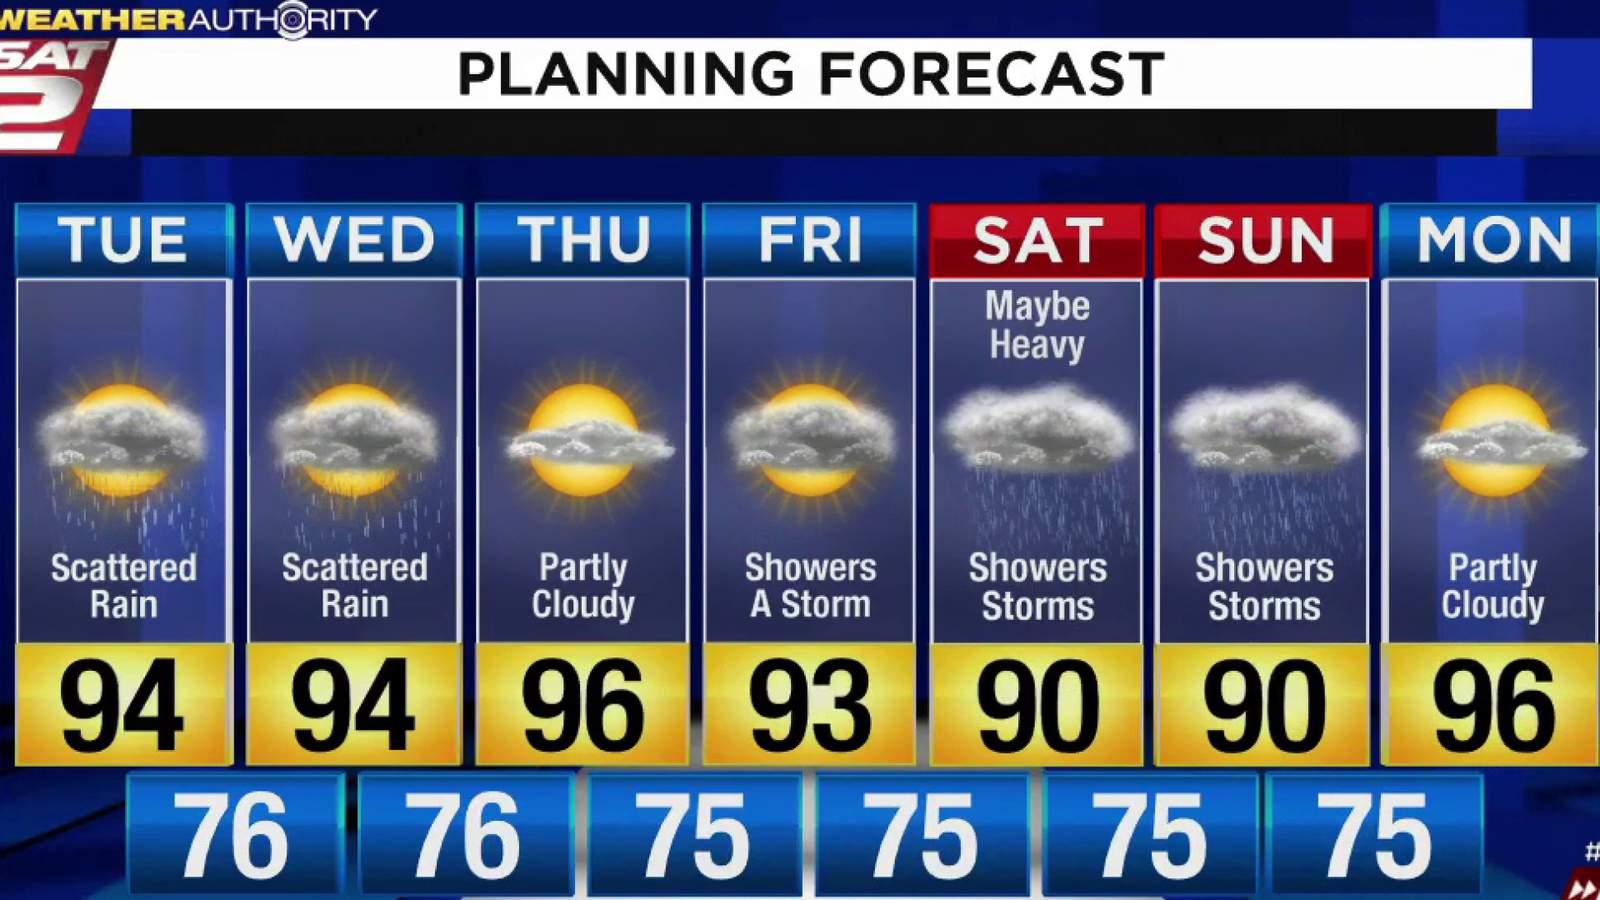 Mike Osterhage's weather webcast for Tuesday, July 21